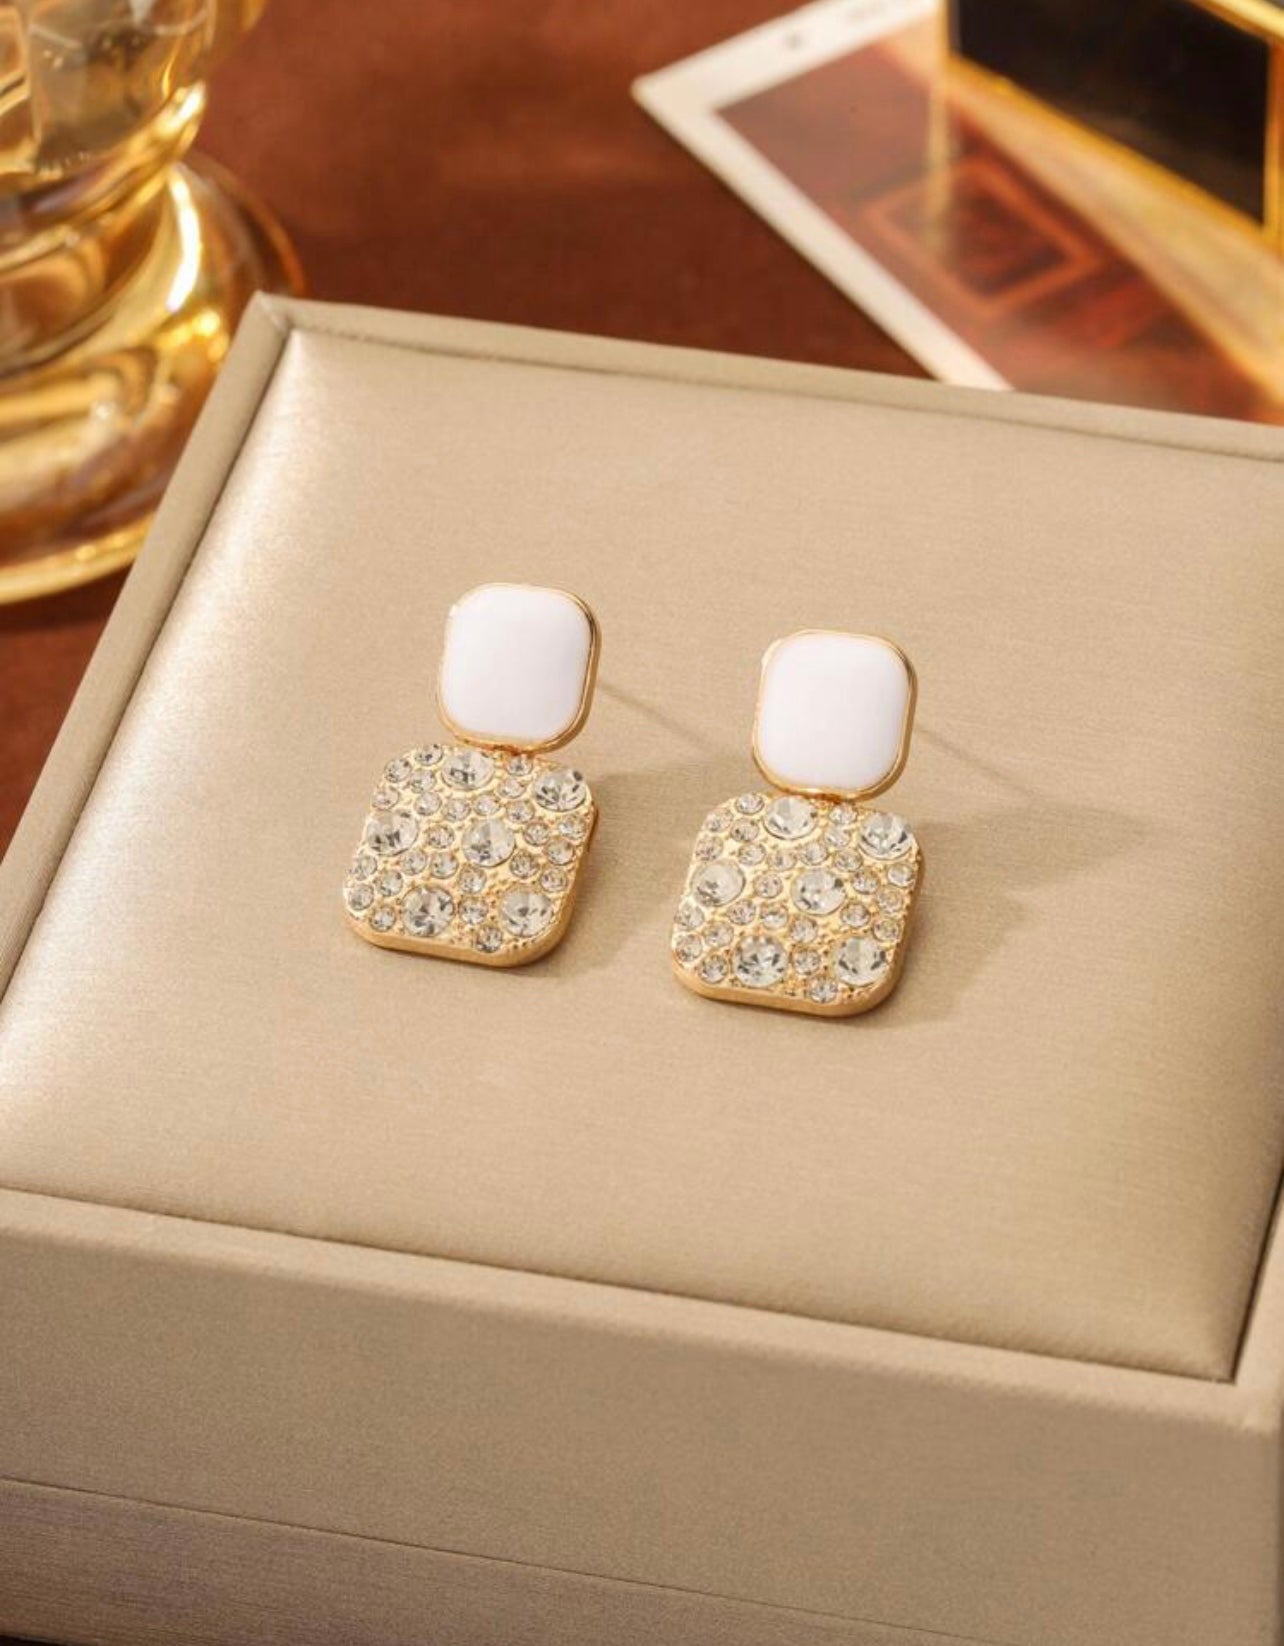 Beautiful White and Crystal Earrings